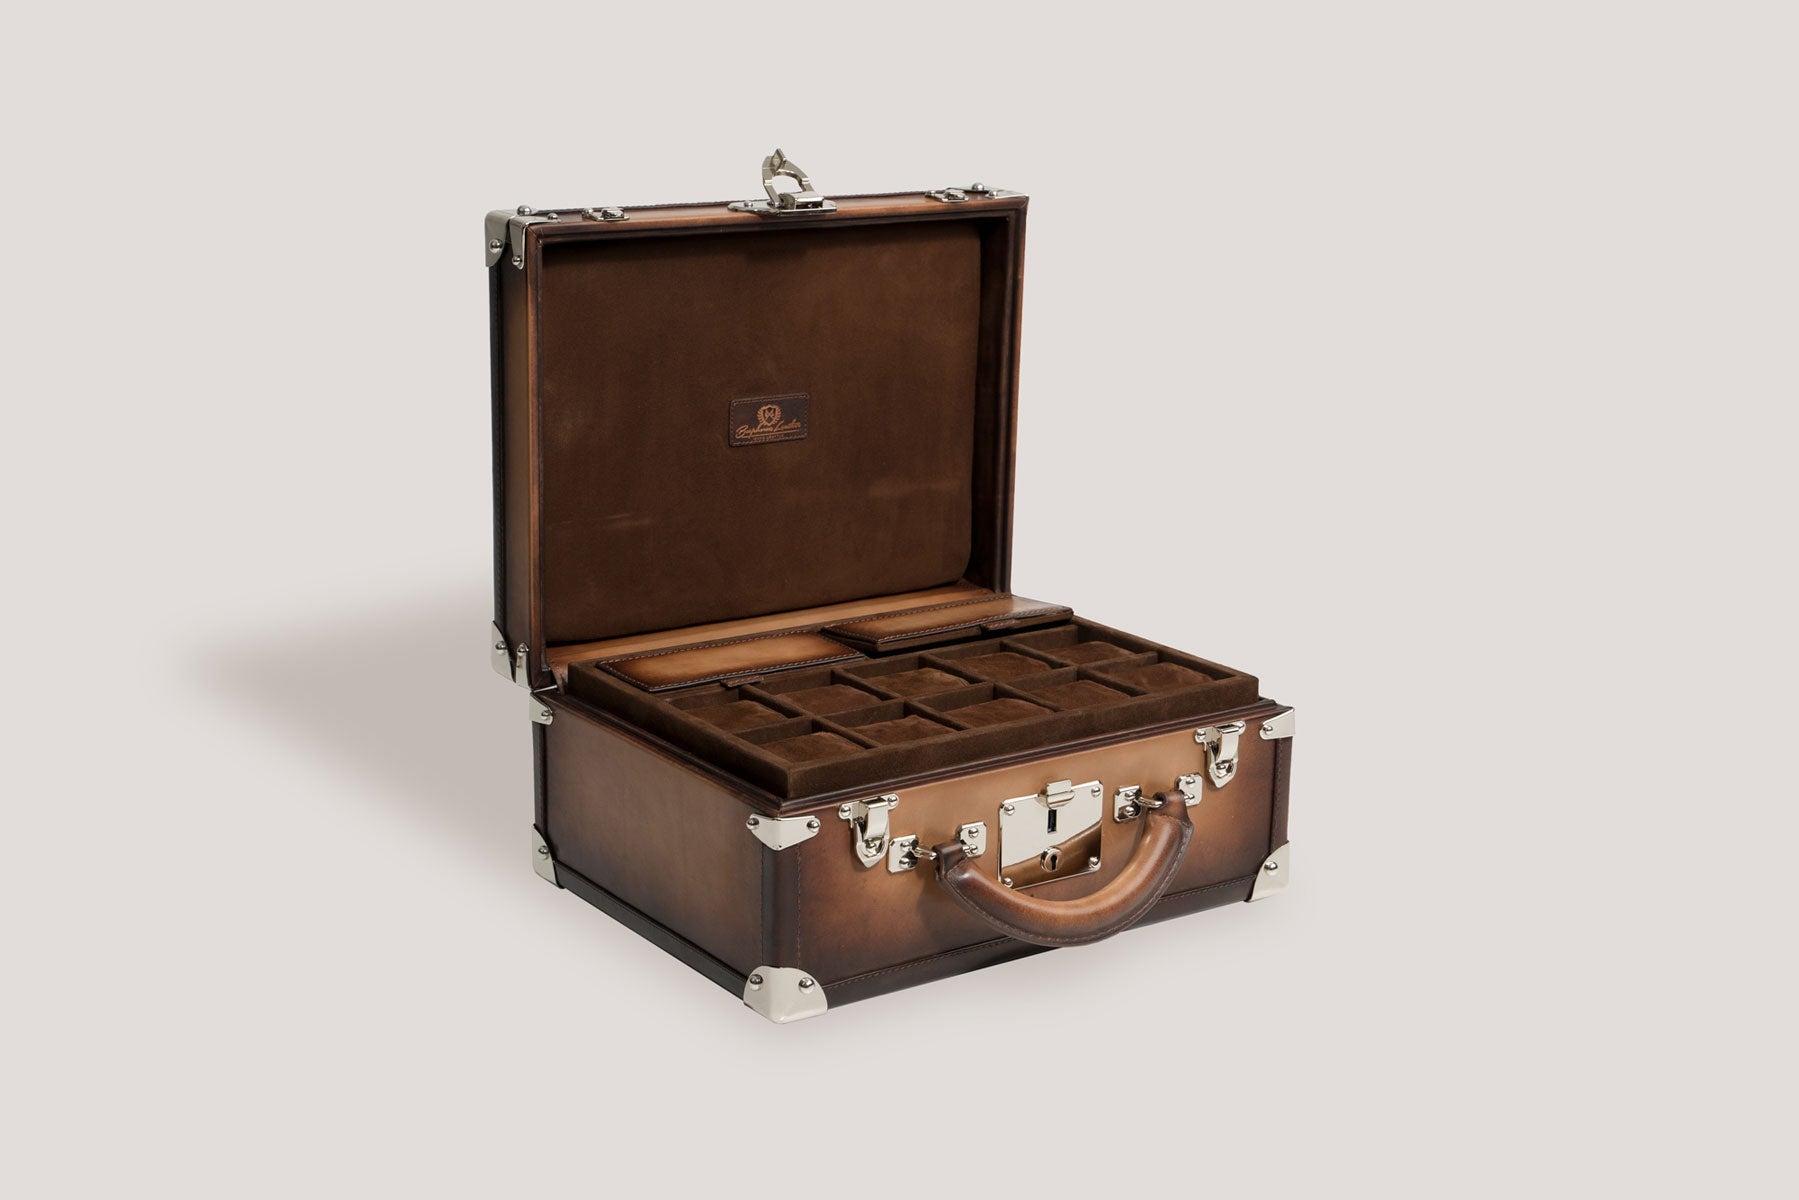 Bosphorus LeatherWatch Trunk - Patina Java Brown for 25 Watches